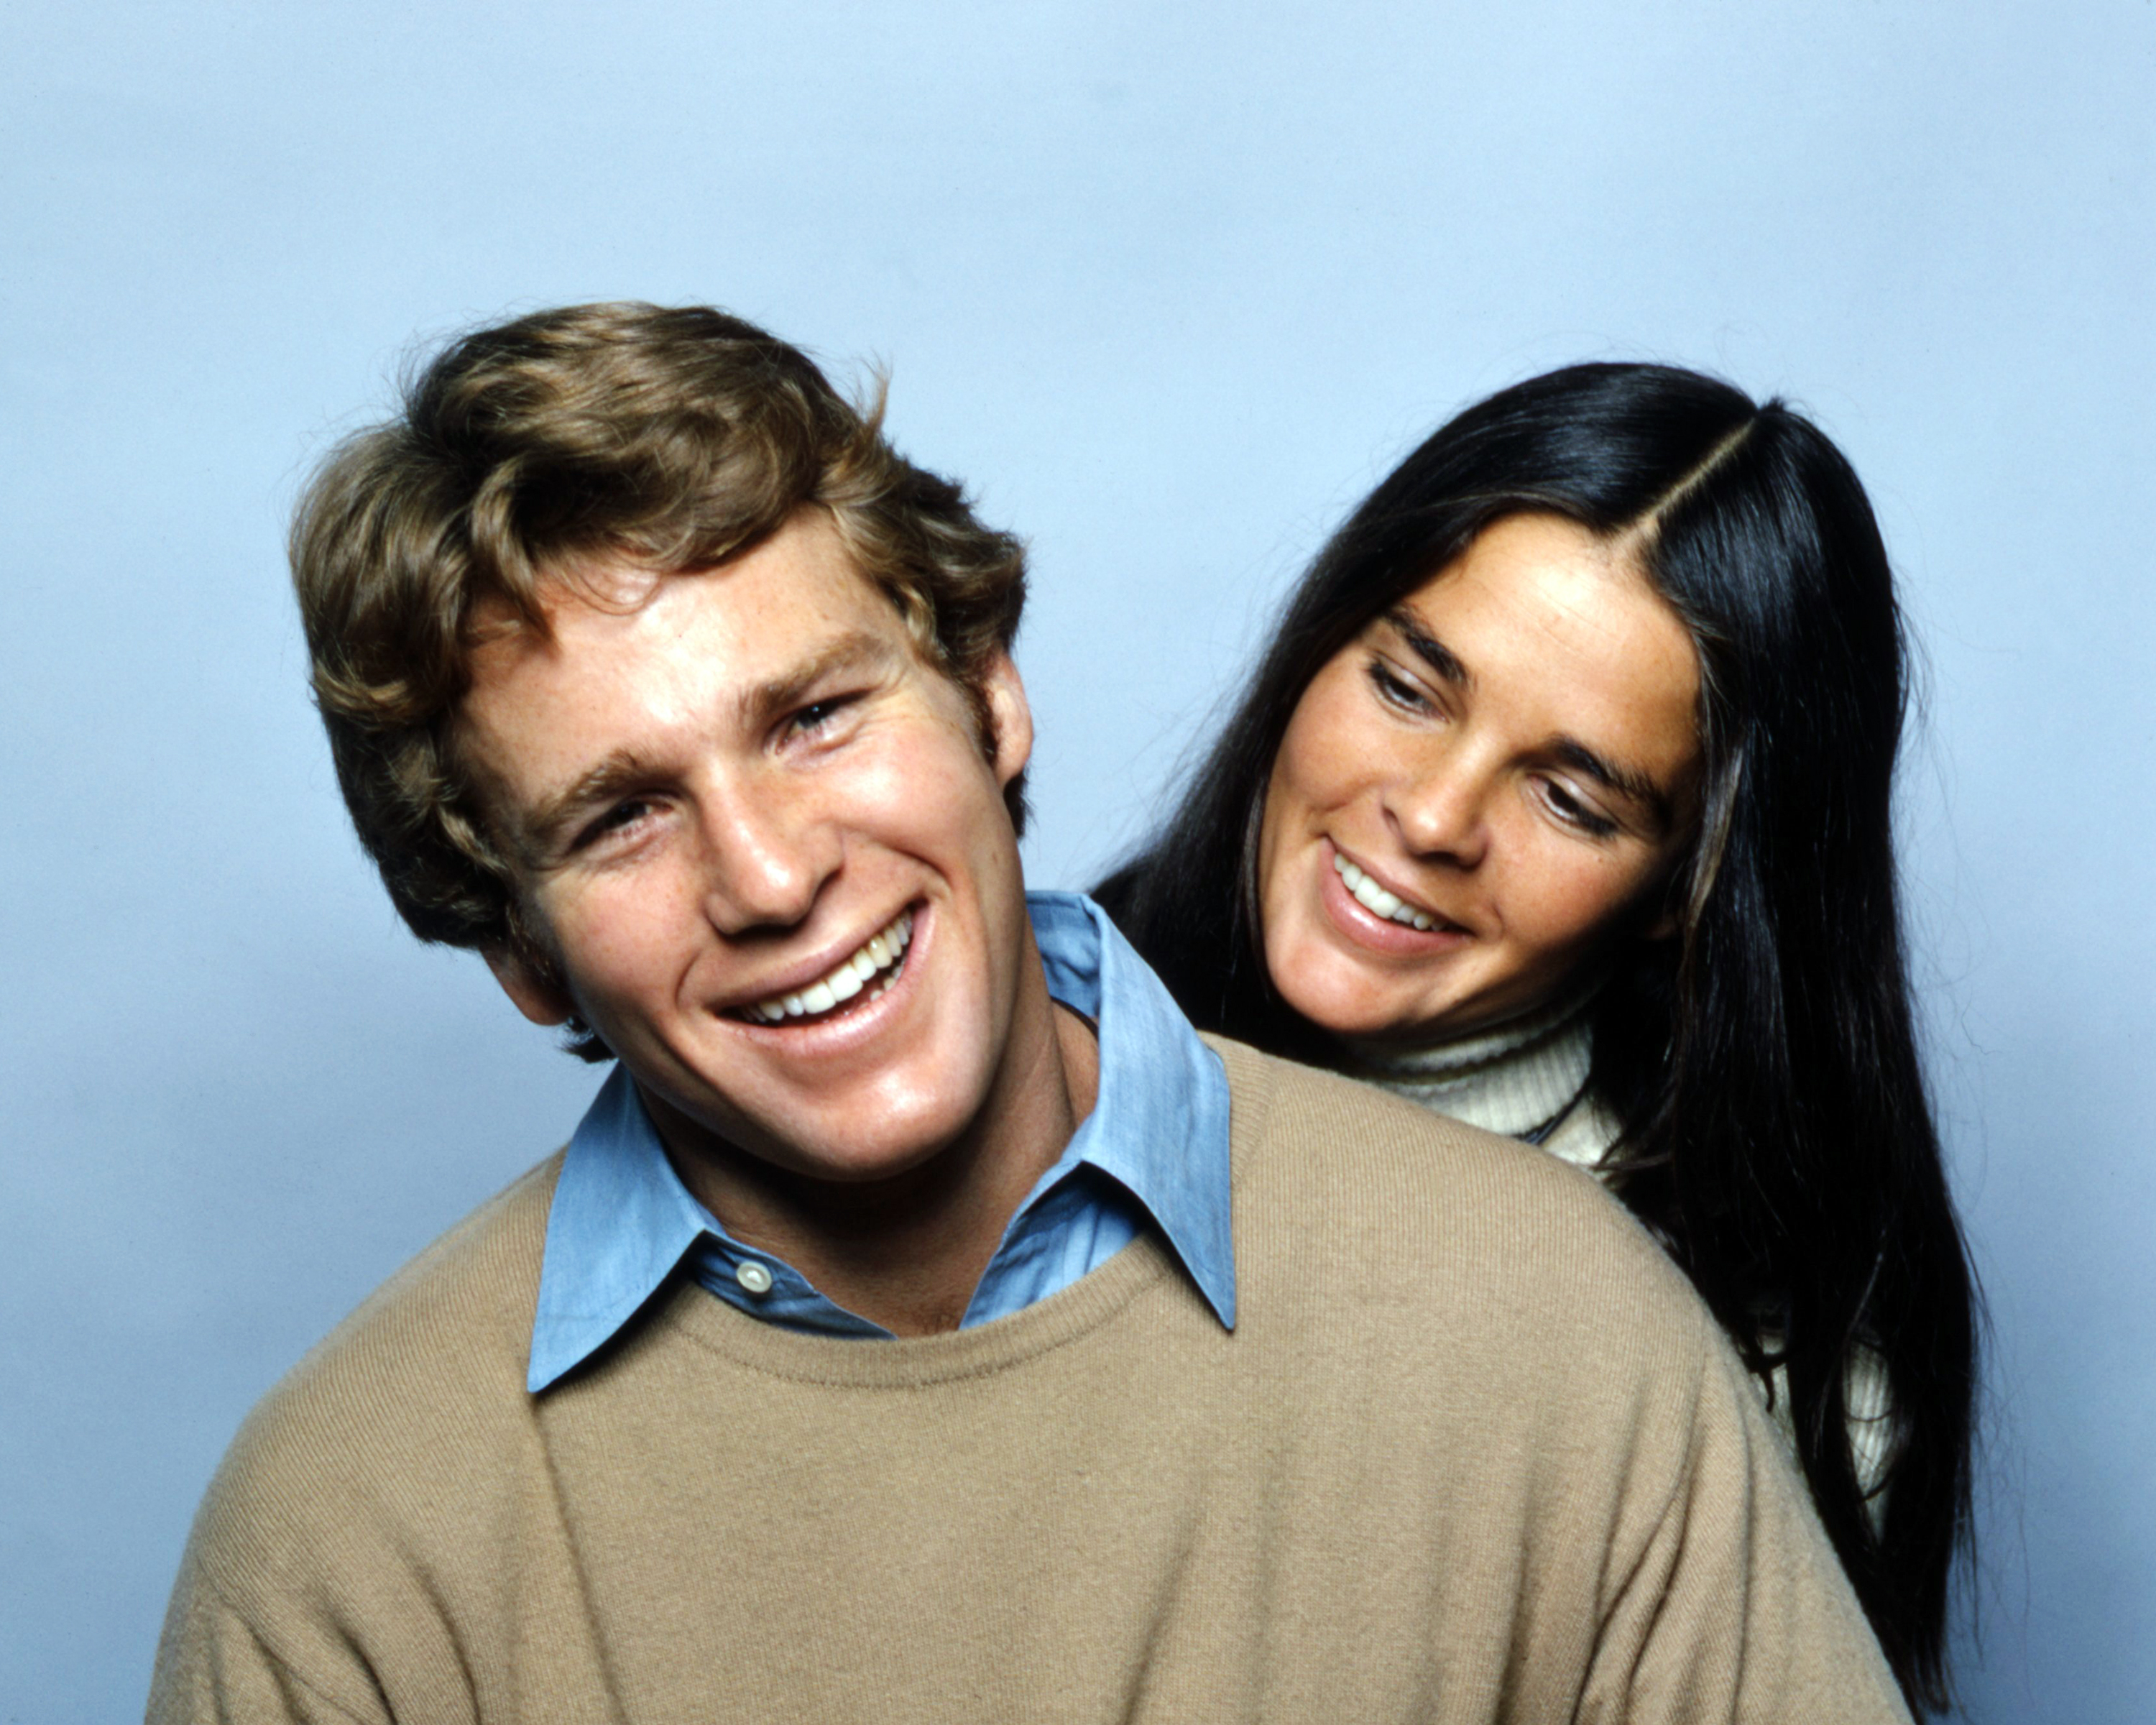 Ryan O'Neal and Ali MacGraw in a promotional photo for "Love Story" in 1970 | Source: Getty Images